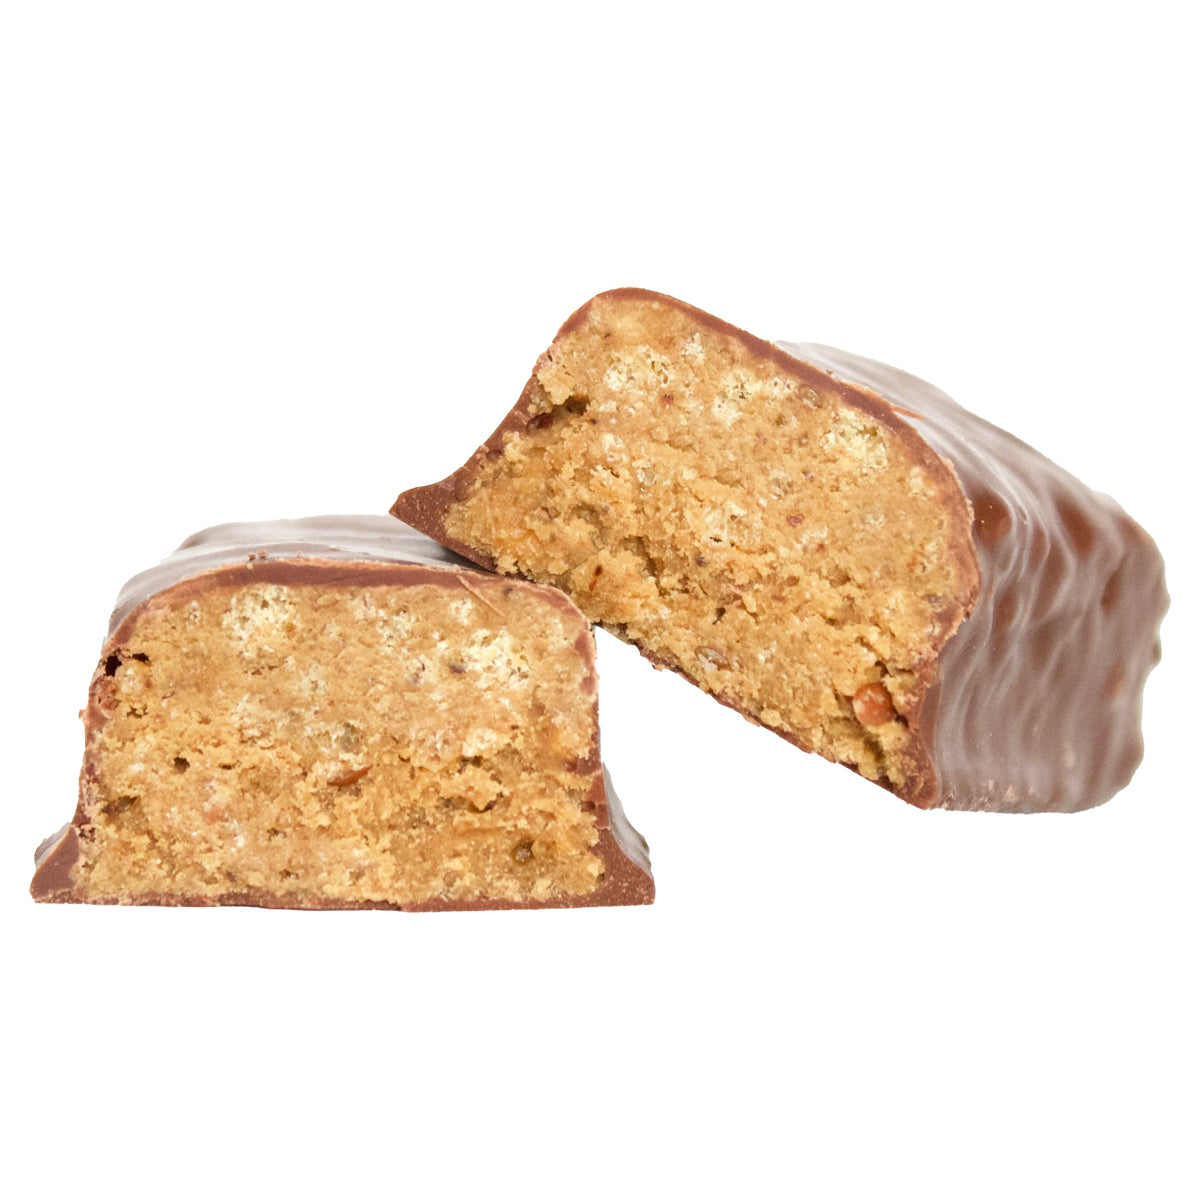 PROBAR Protein Bars in Coffee Crunch by GOHUNT | Pro Bar - GOHUNT Shop